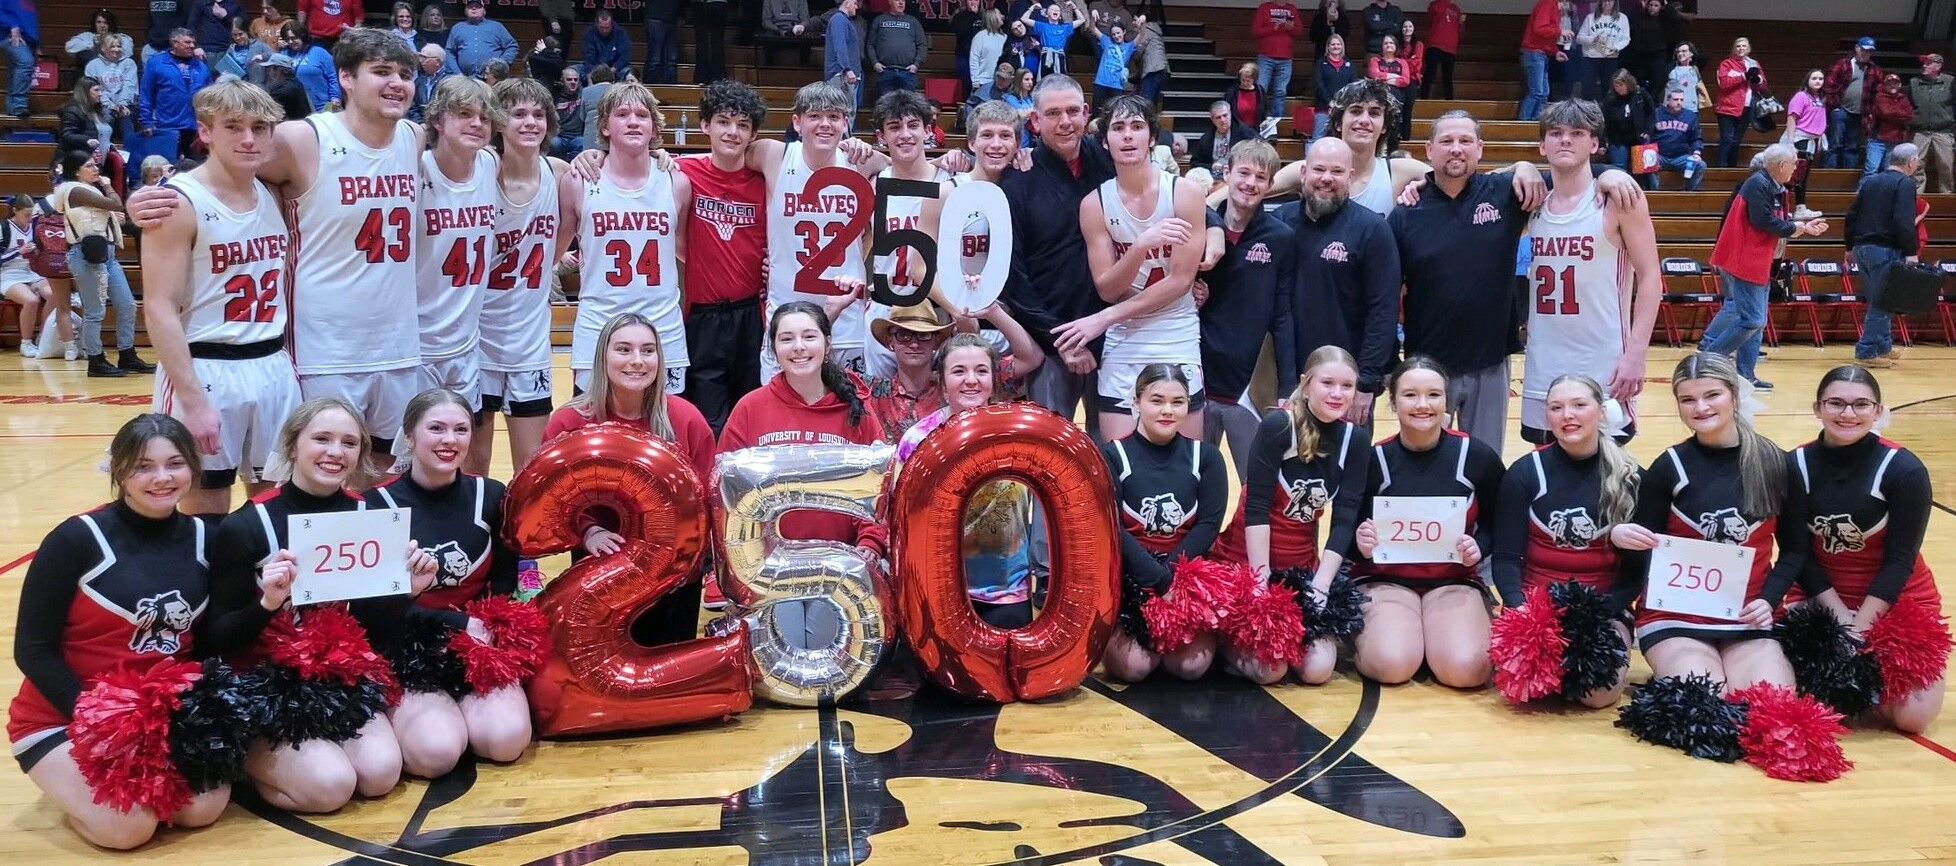 Borden Braves Coach Doc Nash Secures 250th Career Victory with 44-34 Win